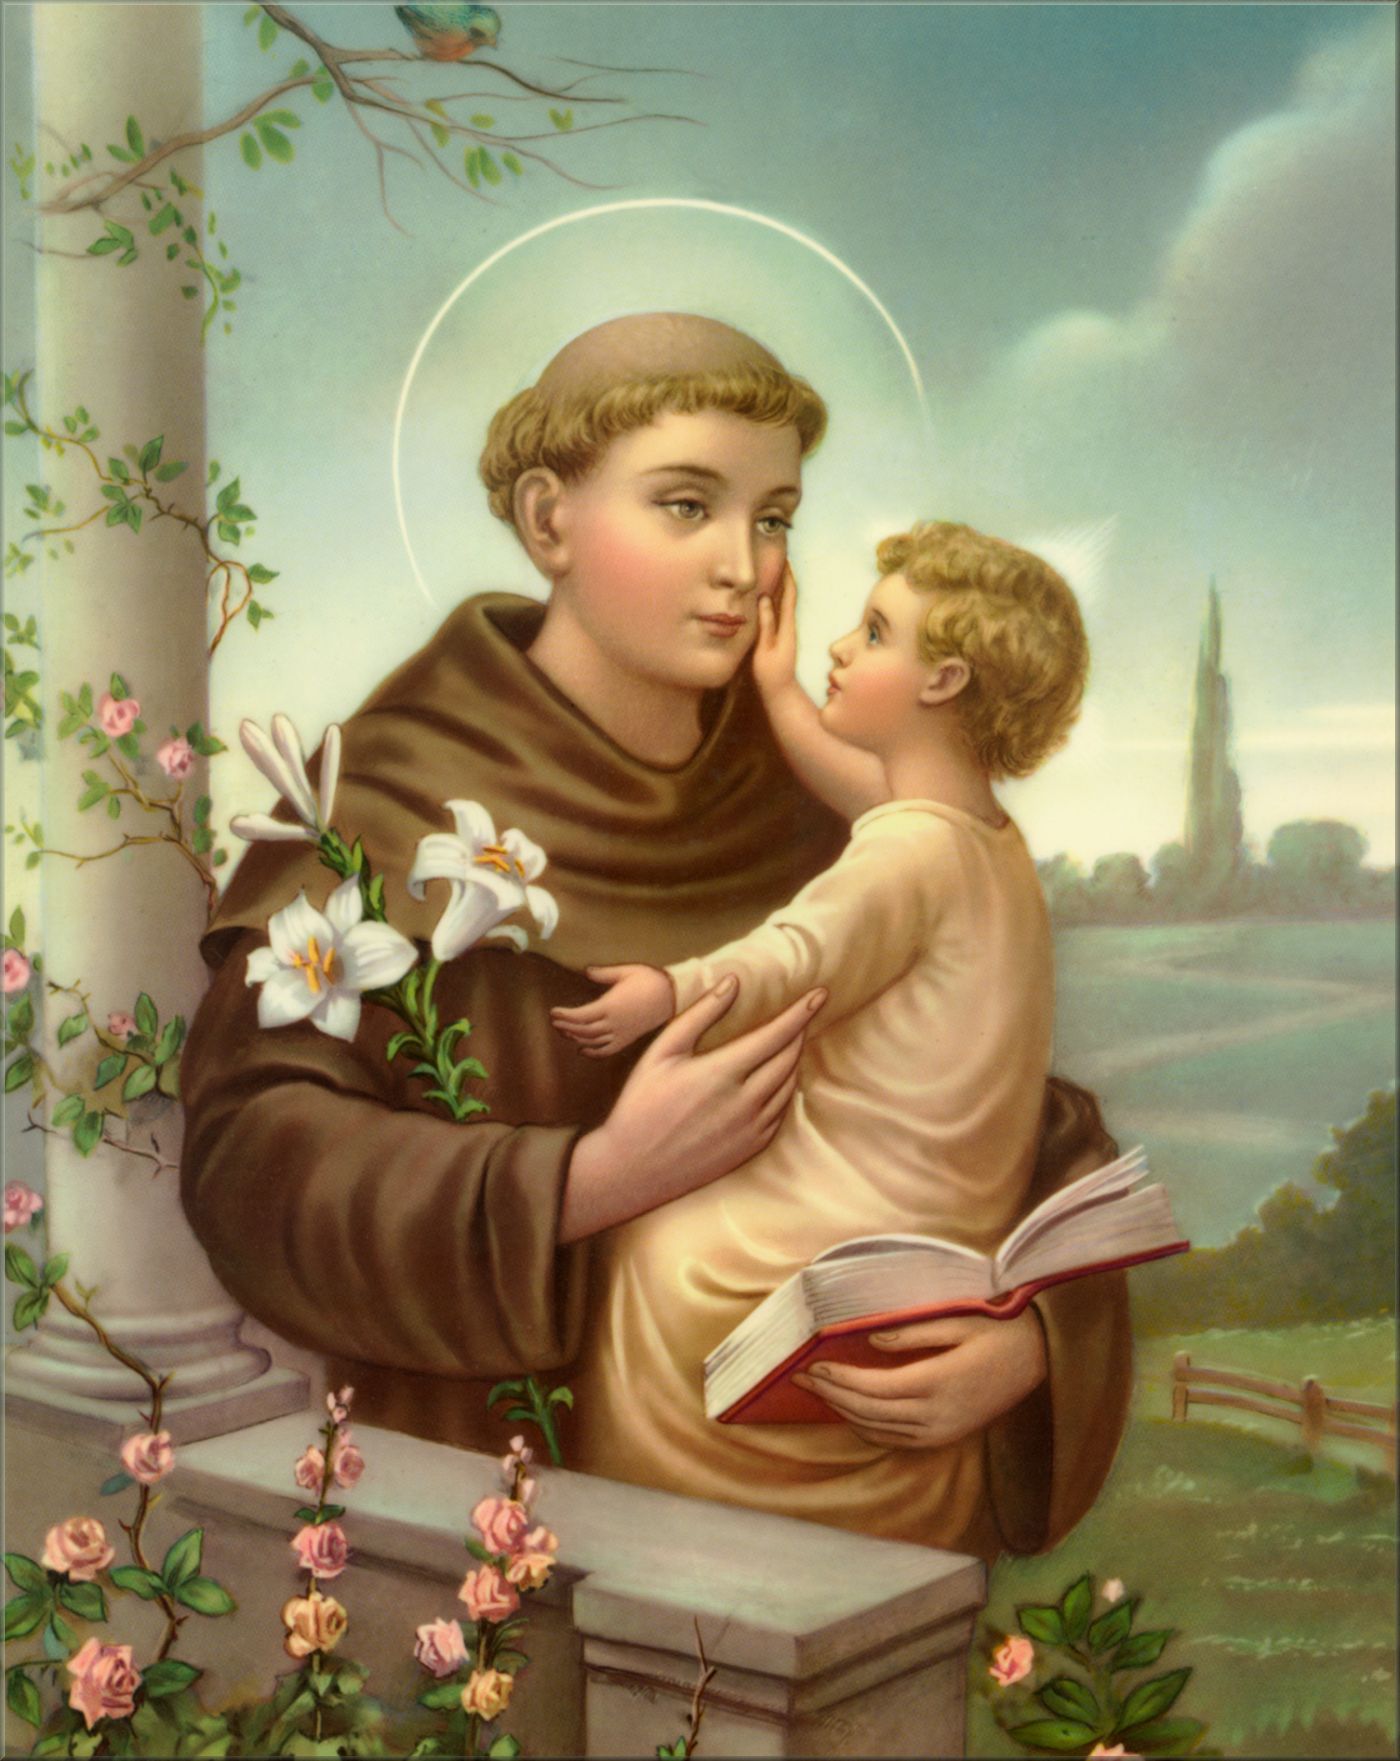 St. Anthony Wallpapers - Wallpaper Cave